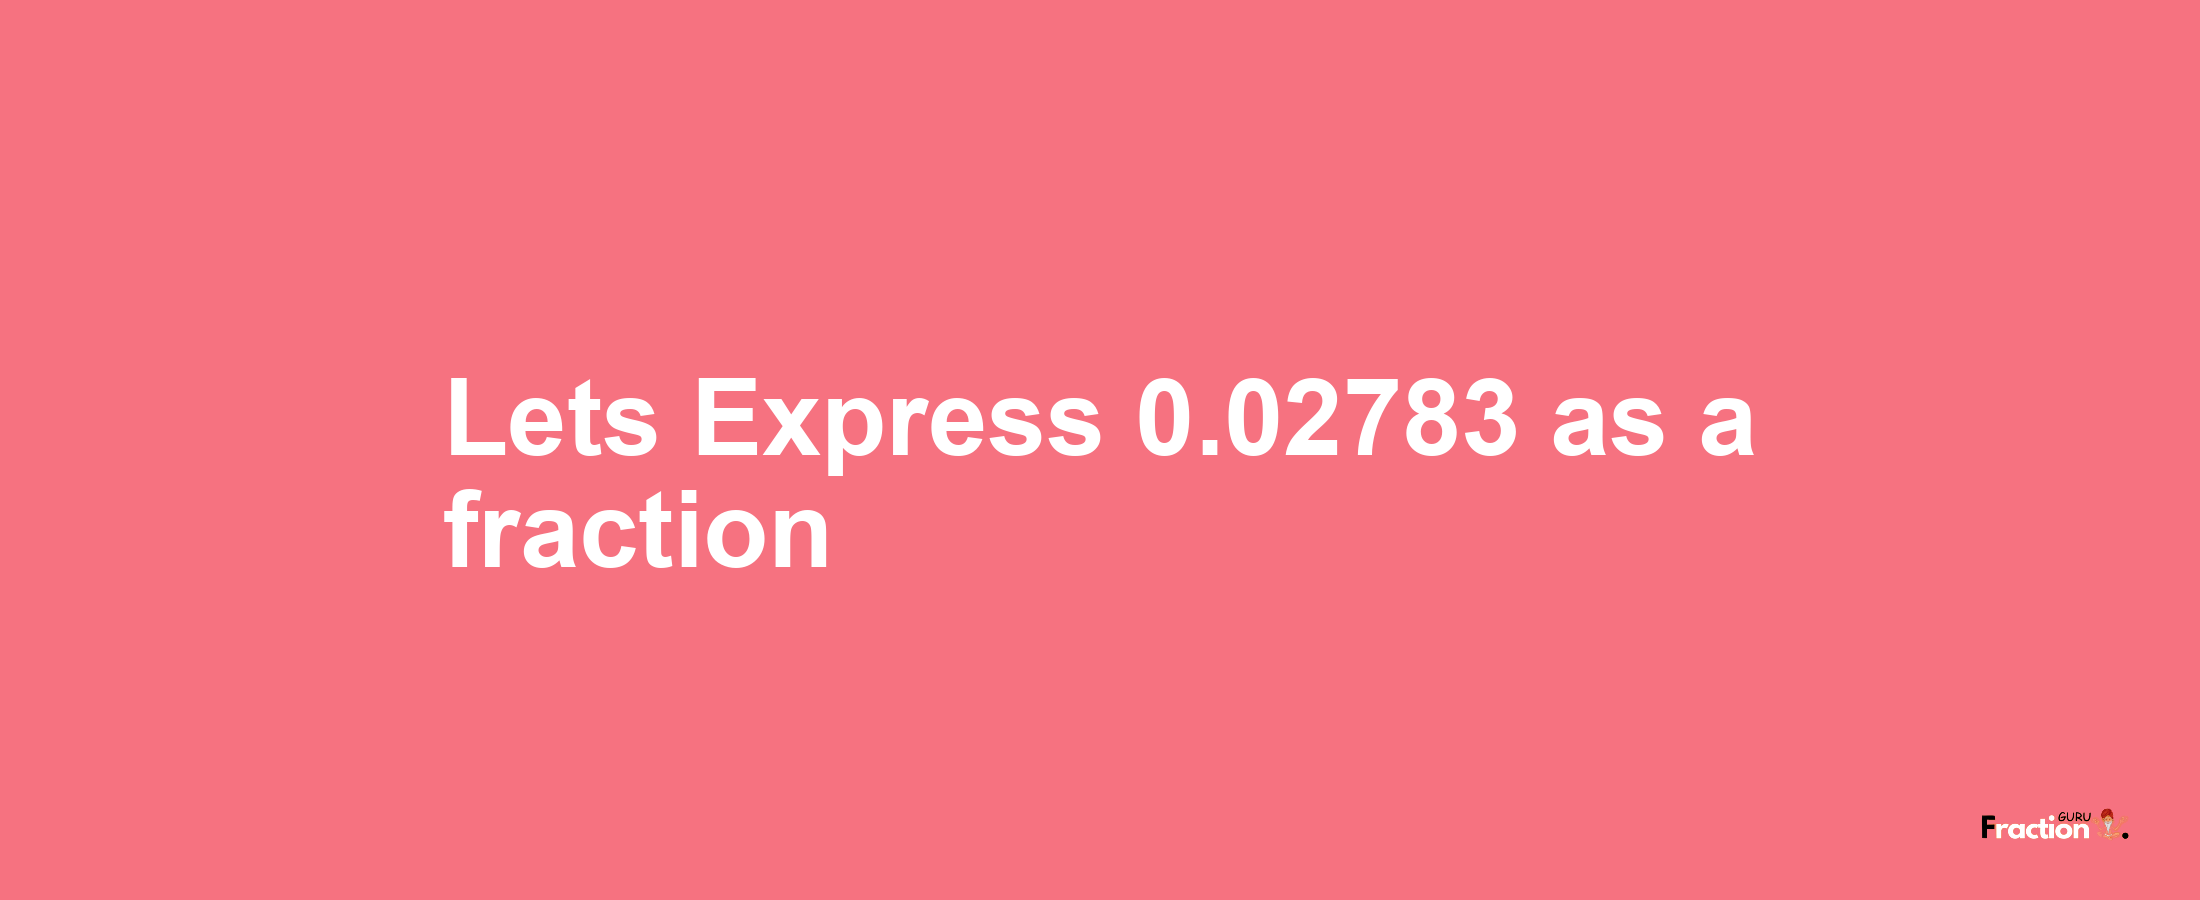 Lets Express 0.02783 as afraction